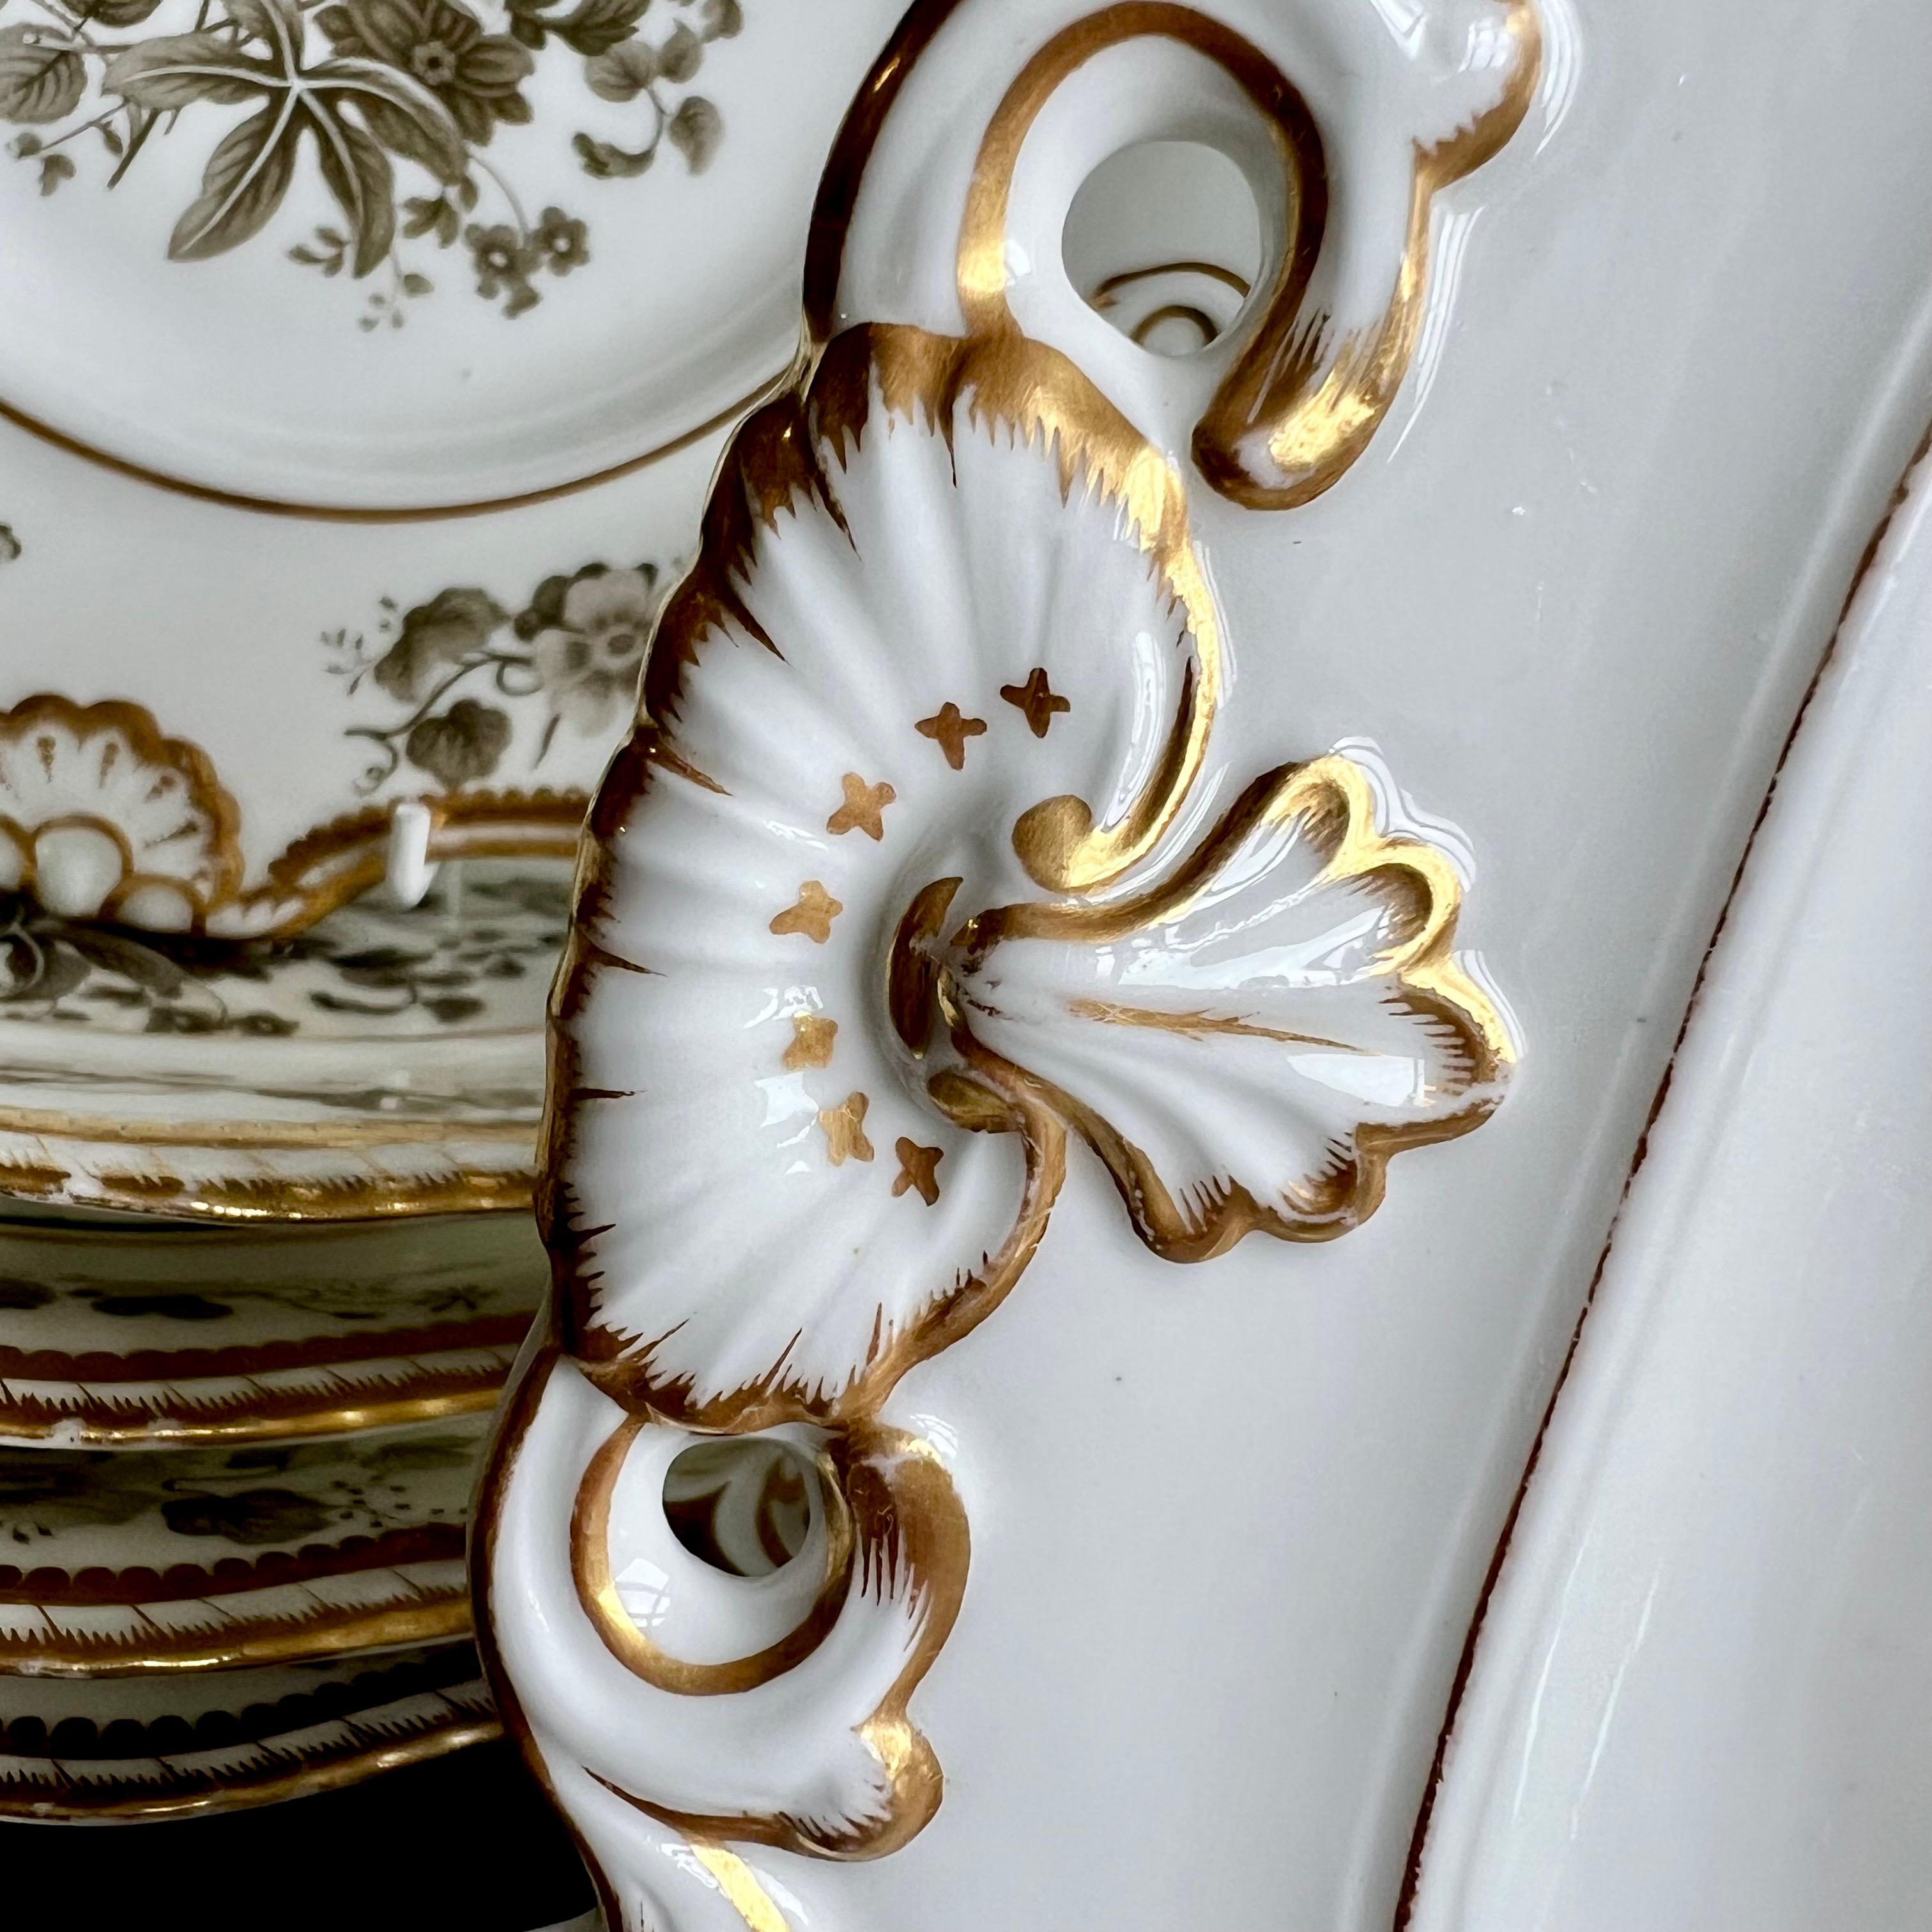 Minton Dessert Service, Inverted Shell White with Monochrome Flowers, ca 1830 For Sale 1